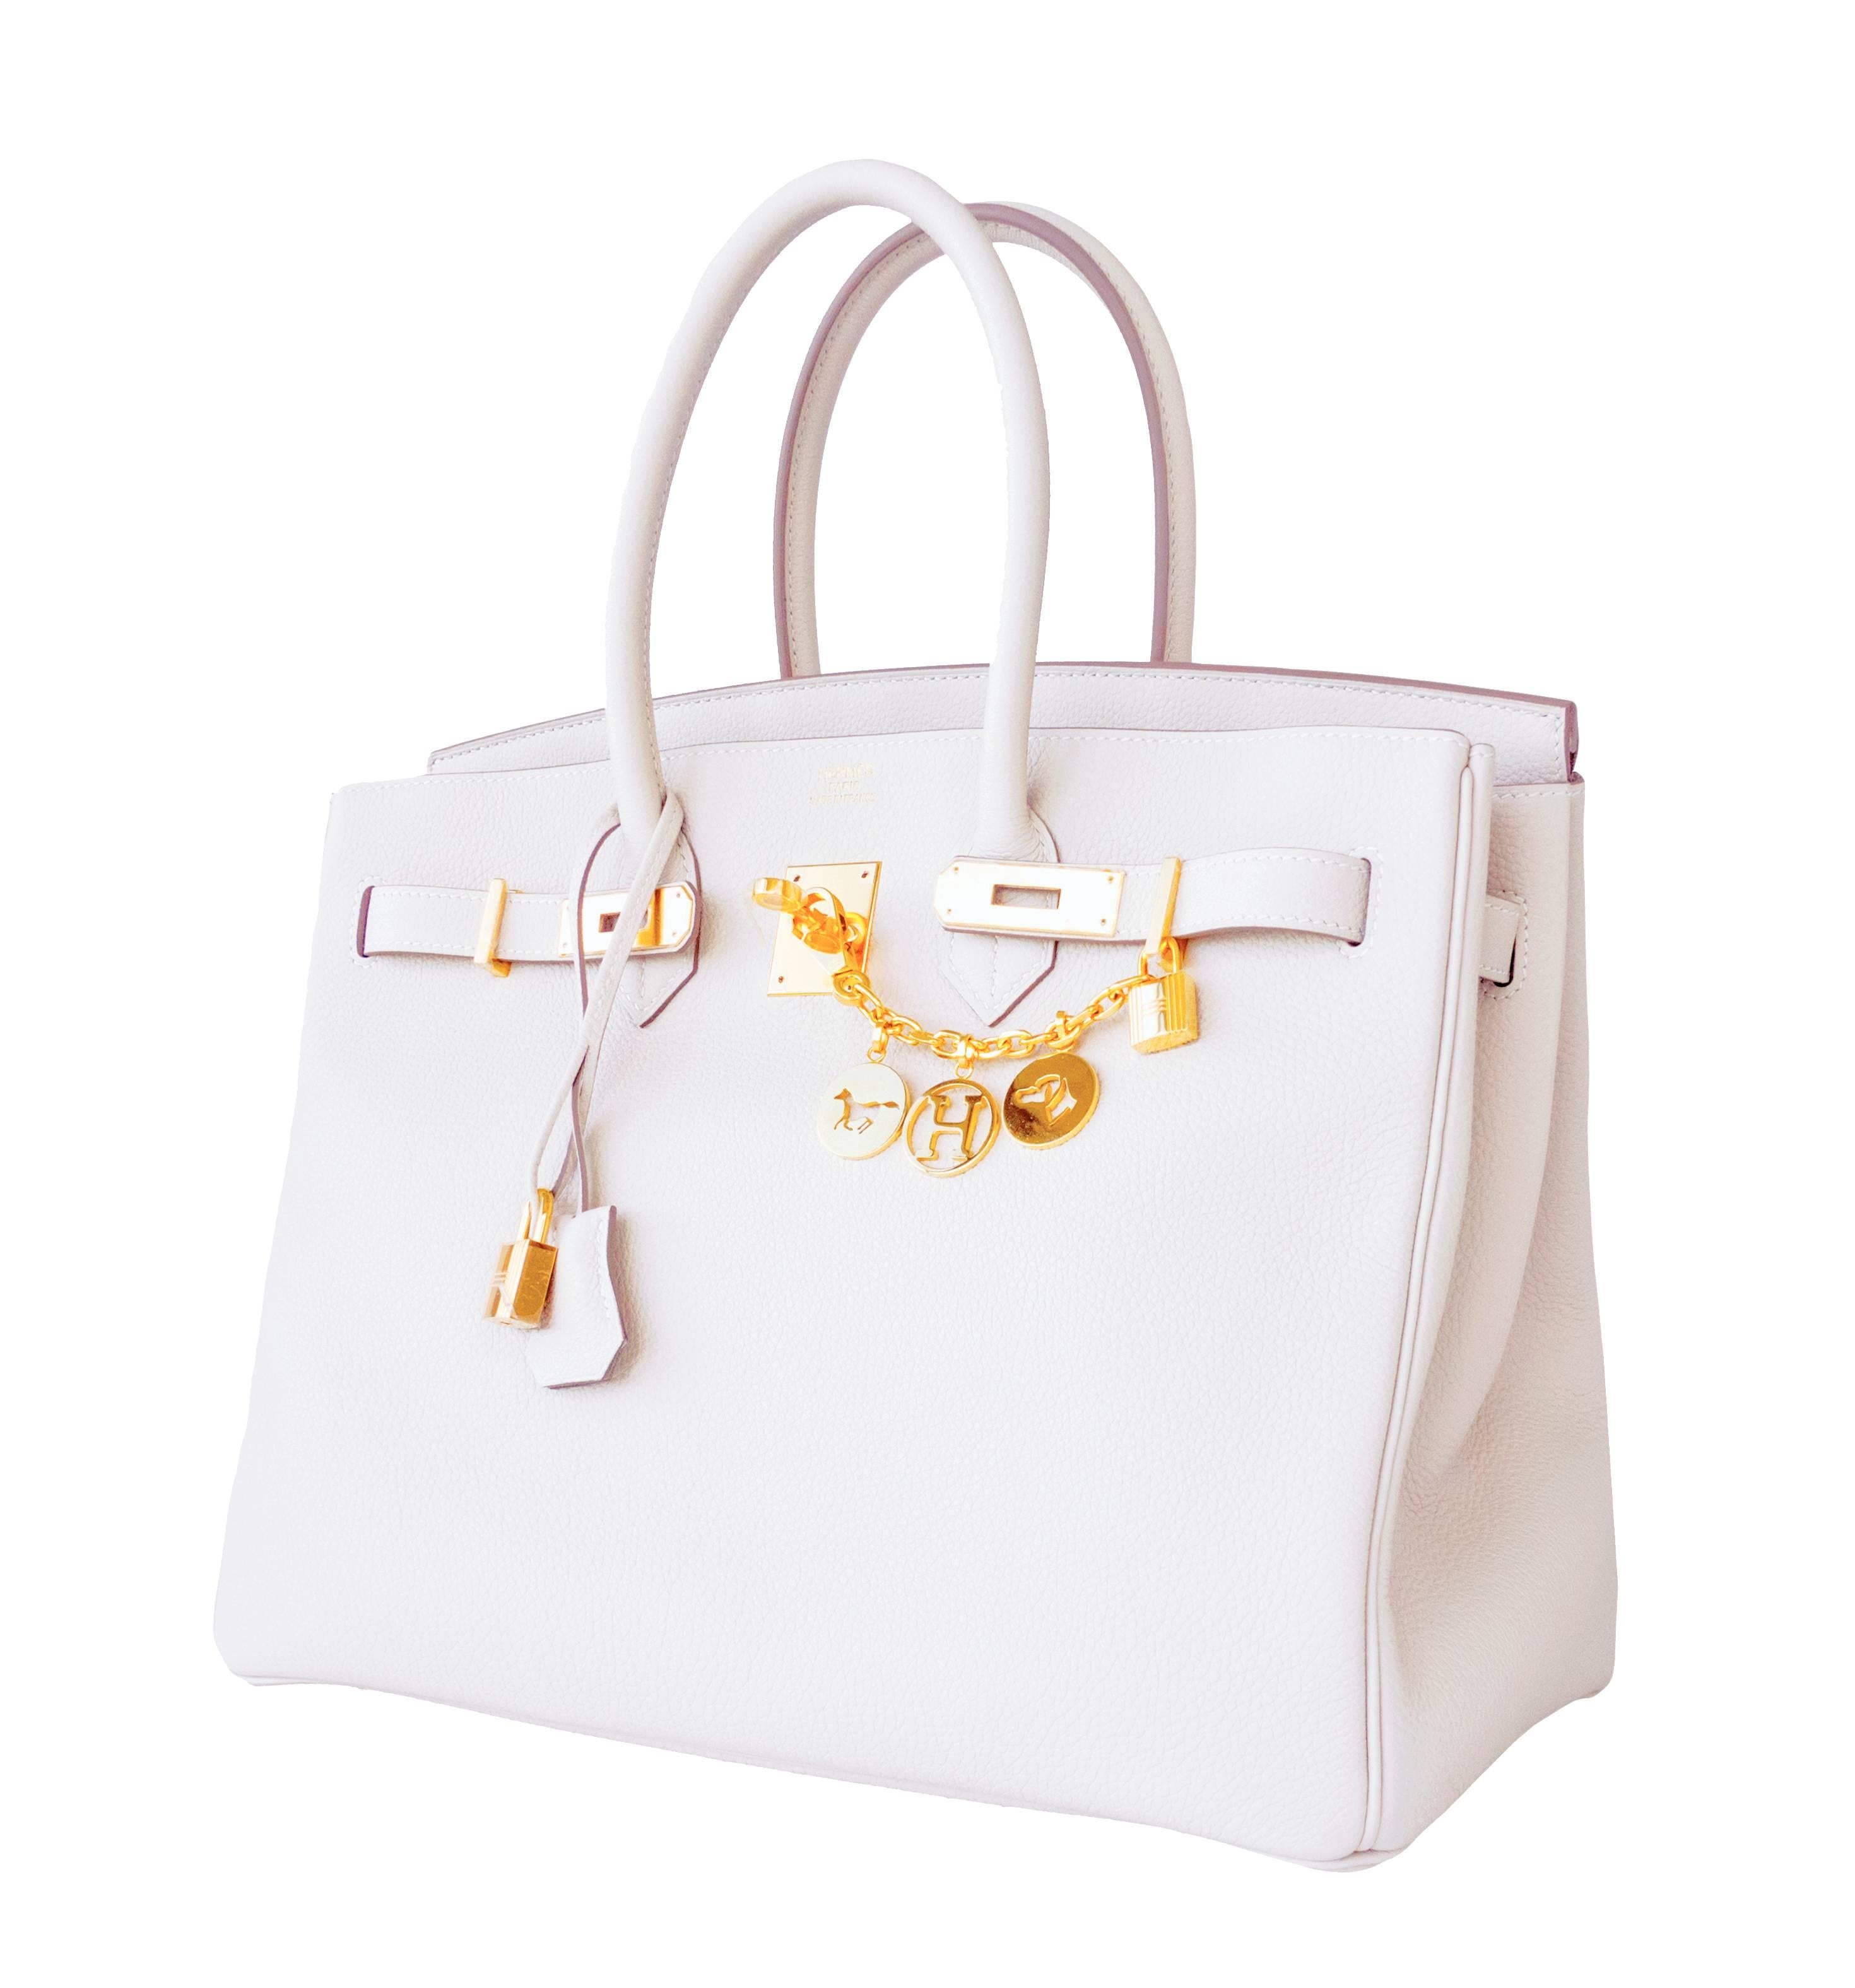 Hermes Craie Chalk 35cm Togo Birkin Gold GHW Tote Bag Summer Chic
Brand New in Box. Store fresh. Pristine Condition with plastic on hardware. 
Perfect gift! Comes in full set with lock, keys, clochette, sleeper, raincoat, and signature orange